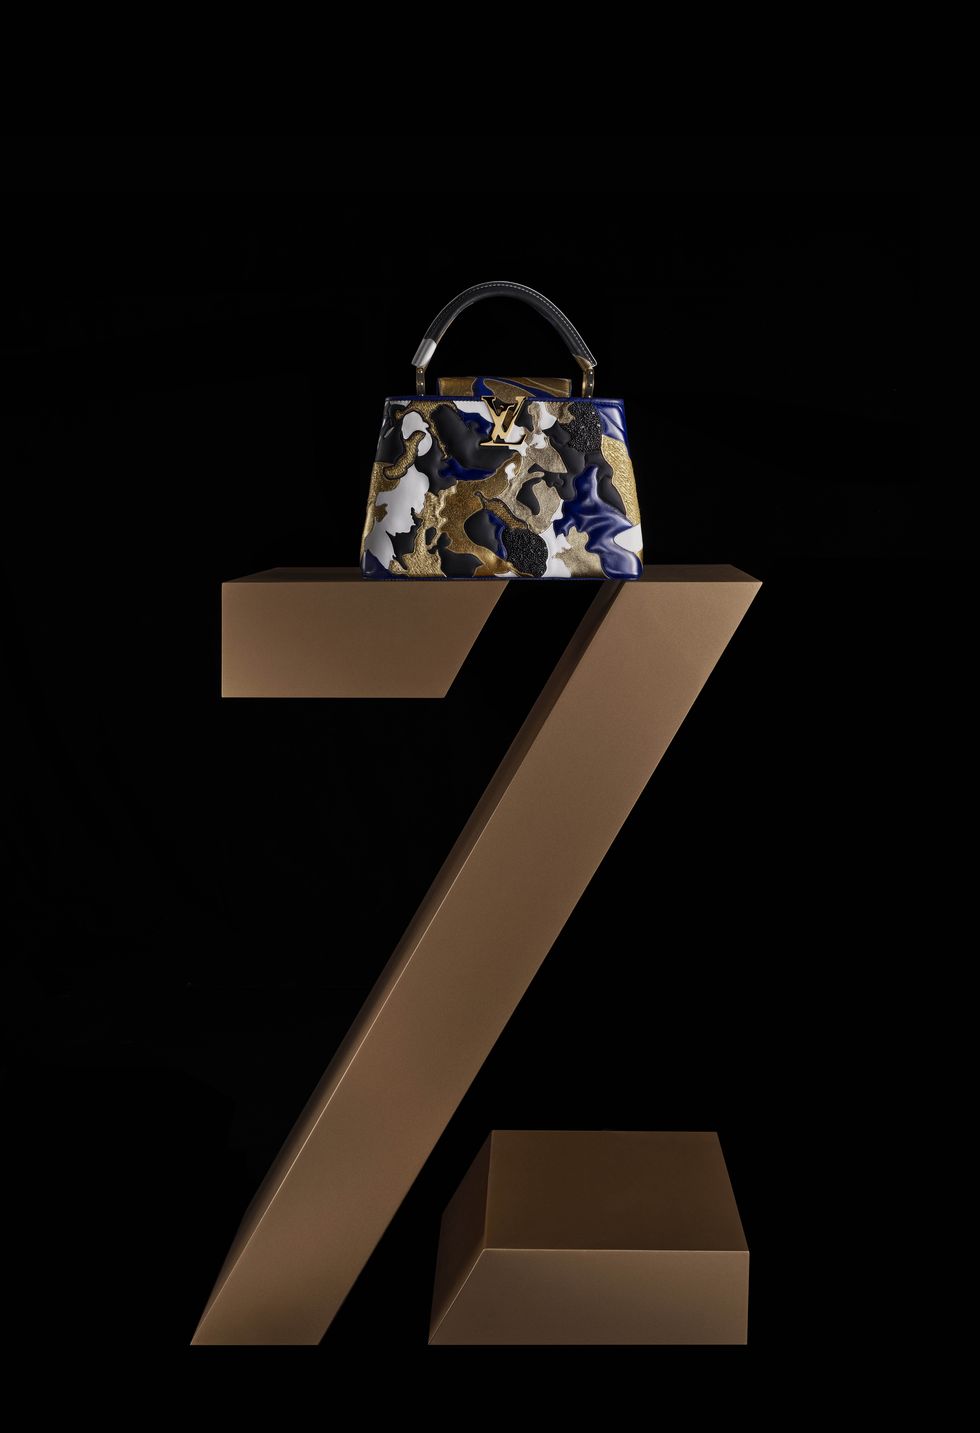 louis vuitton artycapucines系列 capucines by zhao zhao